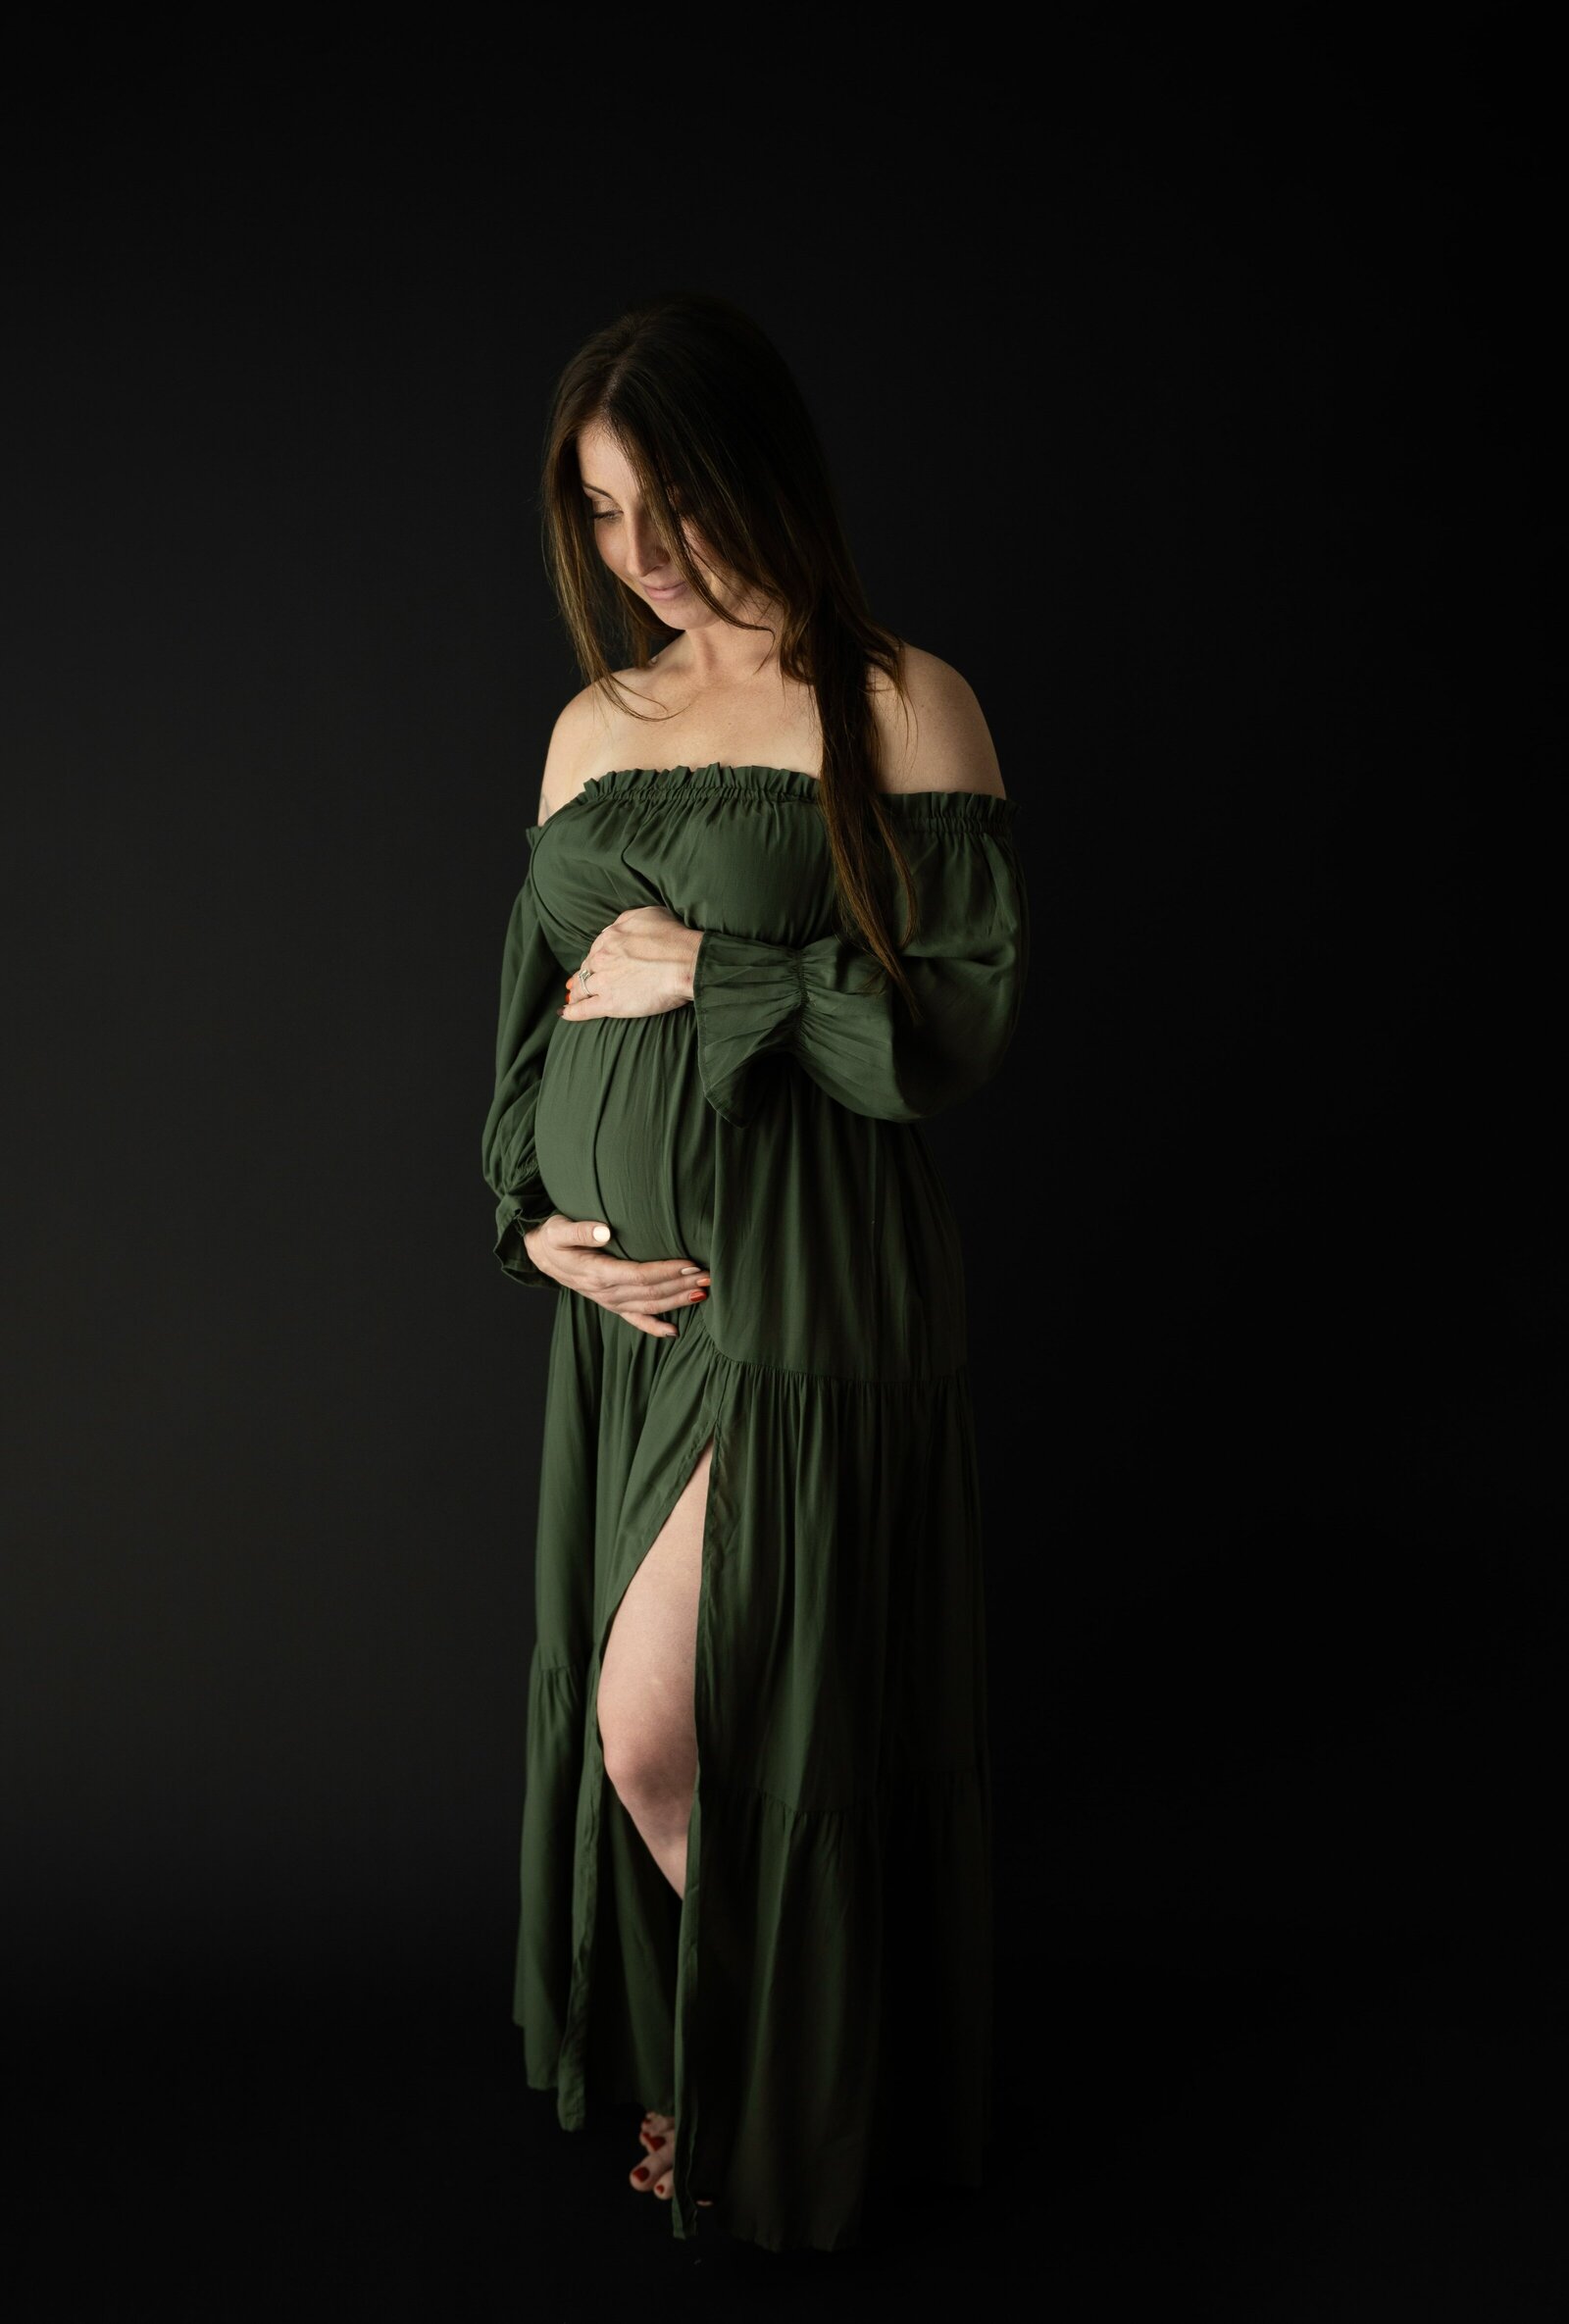 studio maternity session with a woman in a gress dress and black background